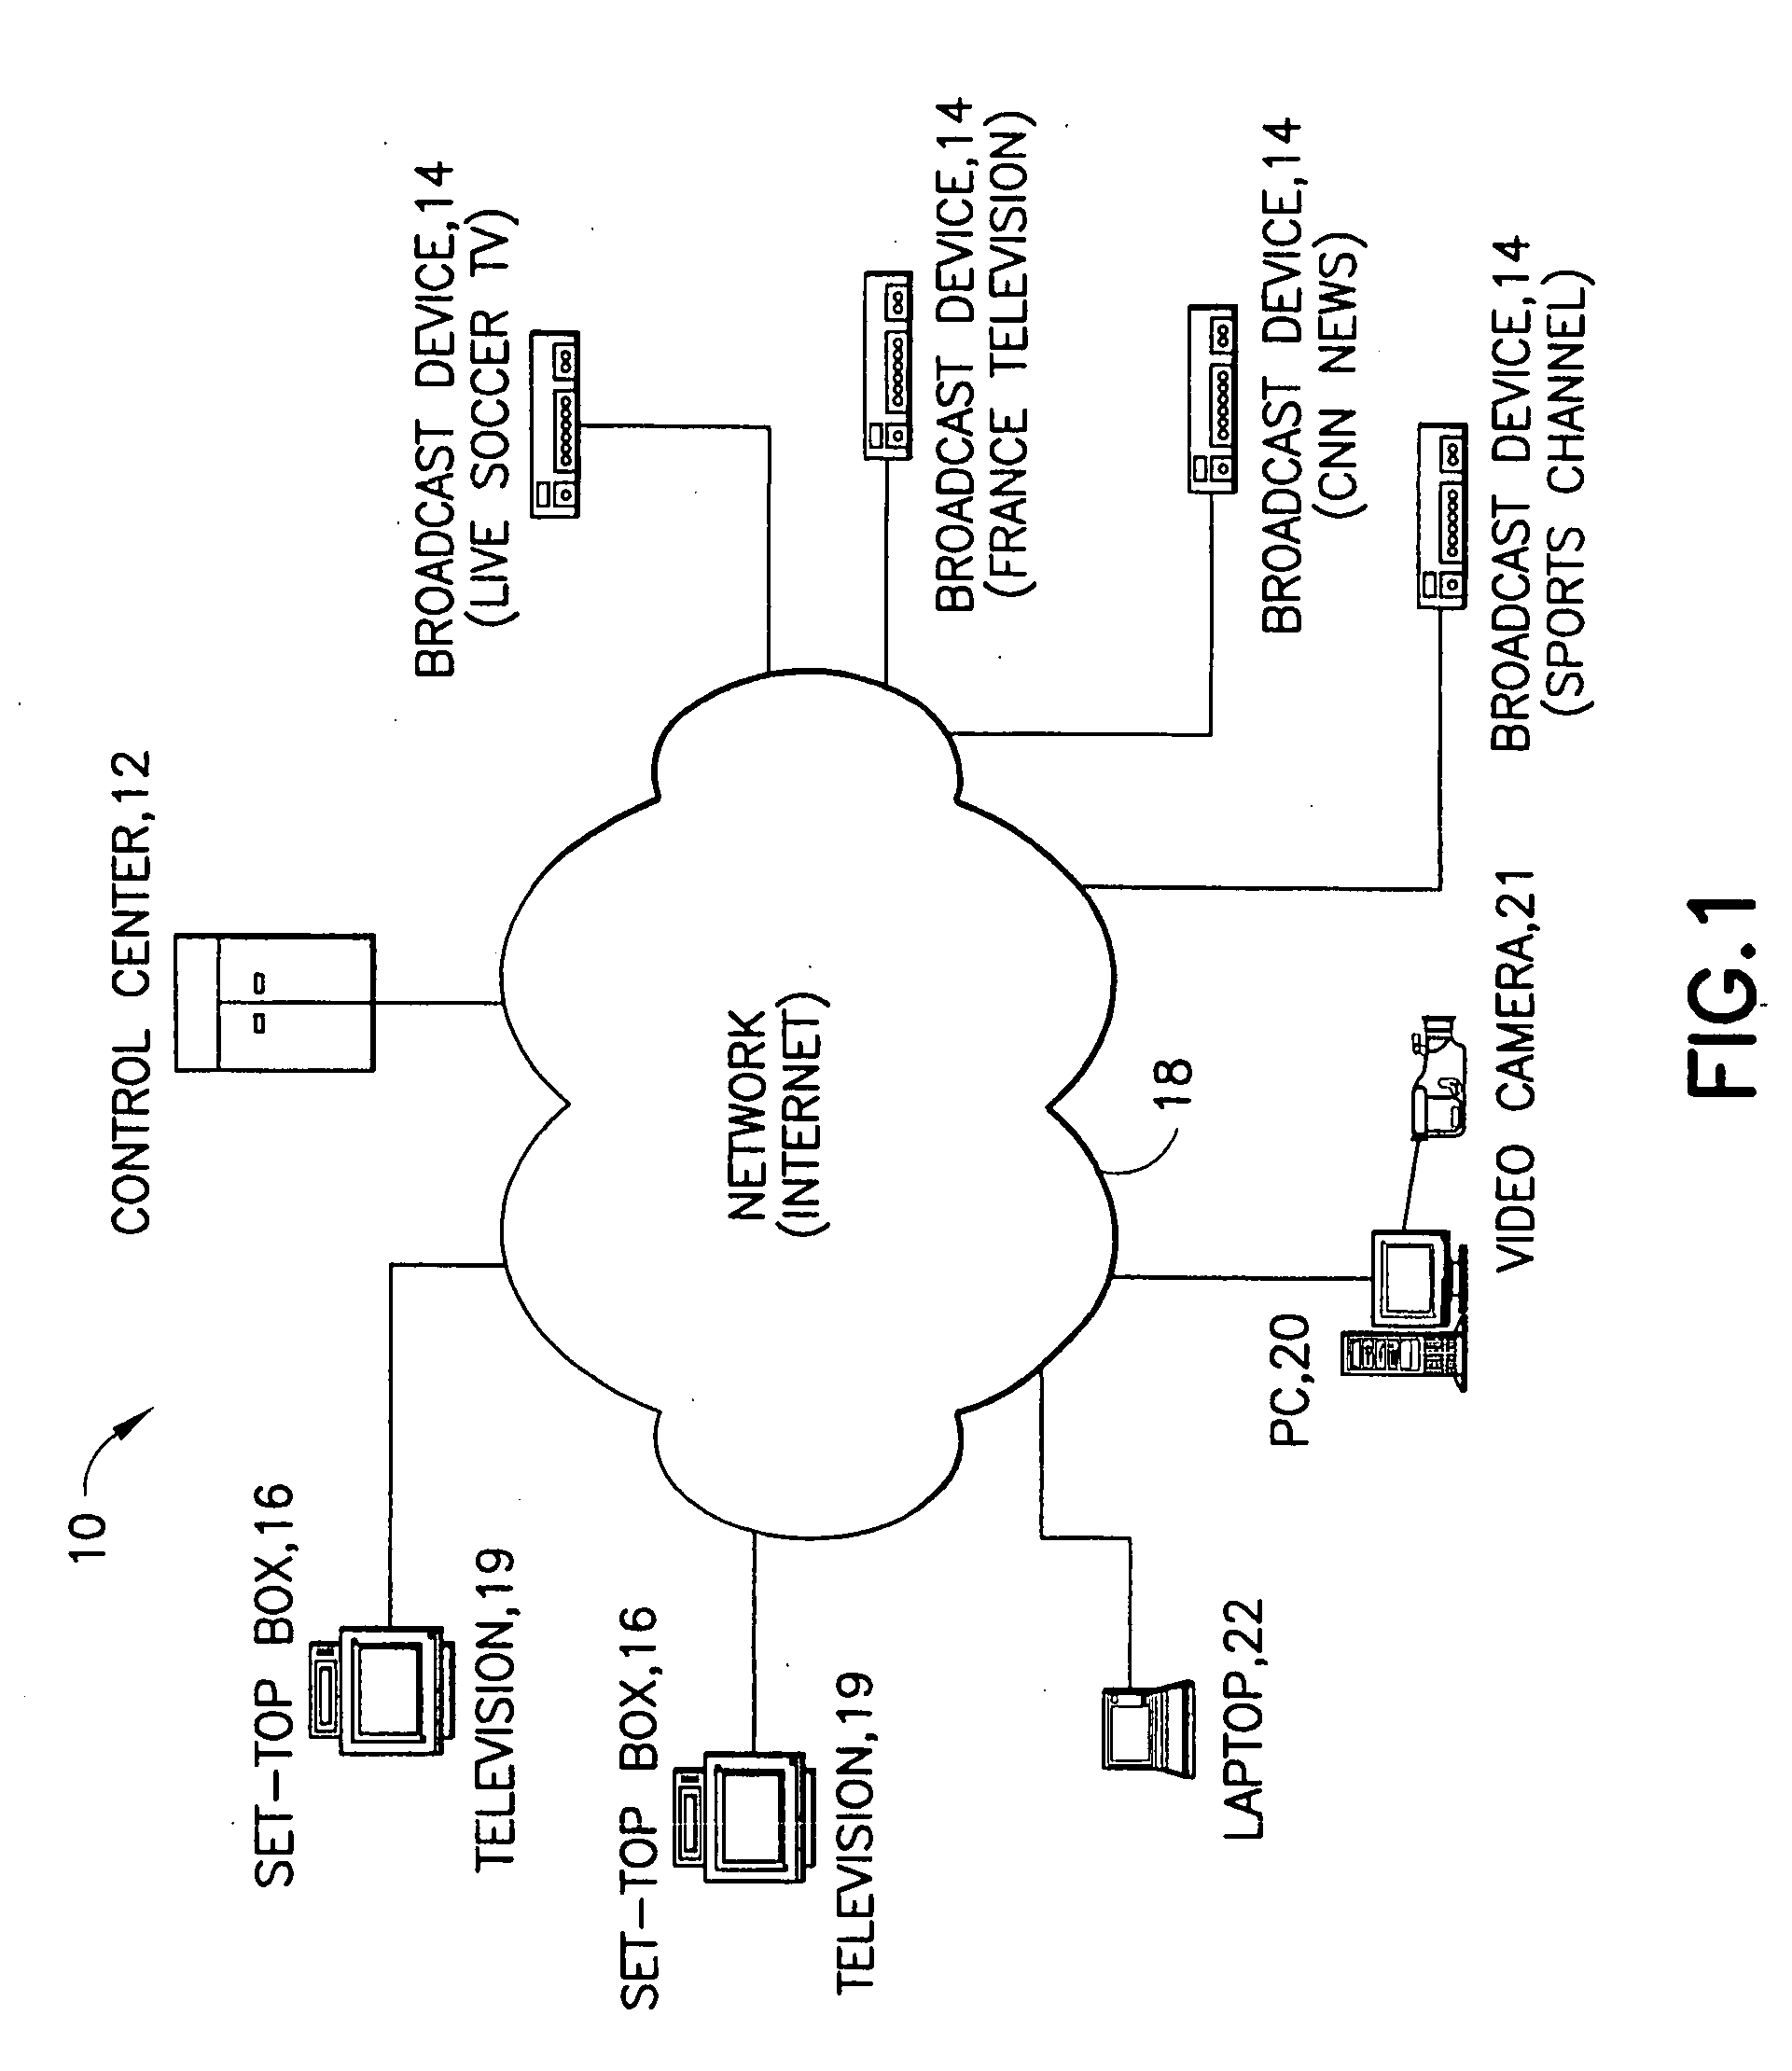 Methods, apparatus, and systems for providing media content over a communications network